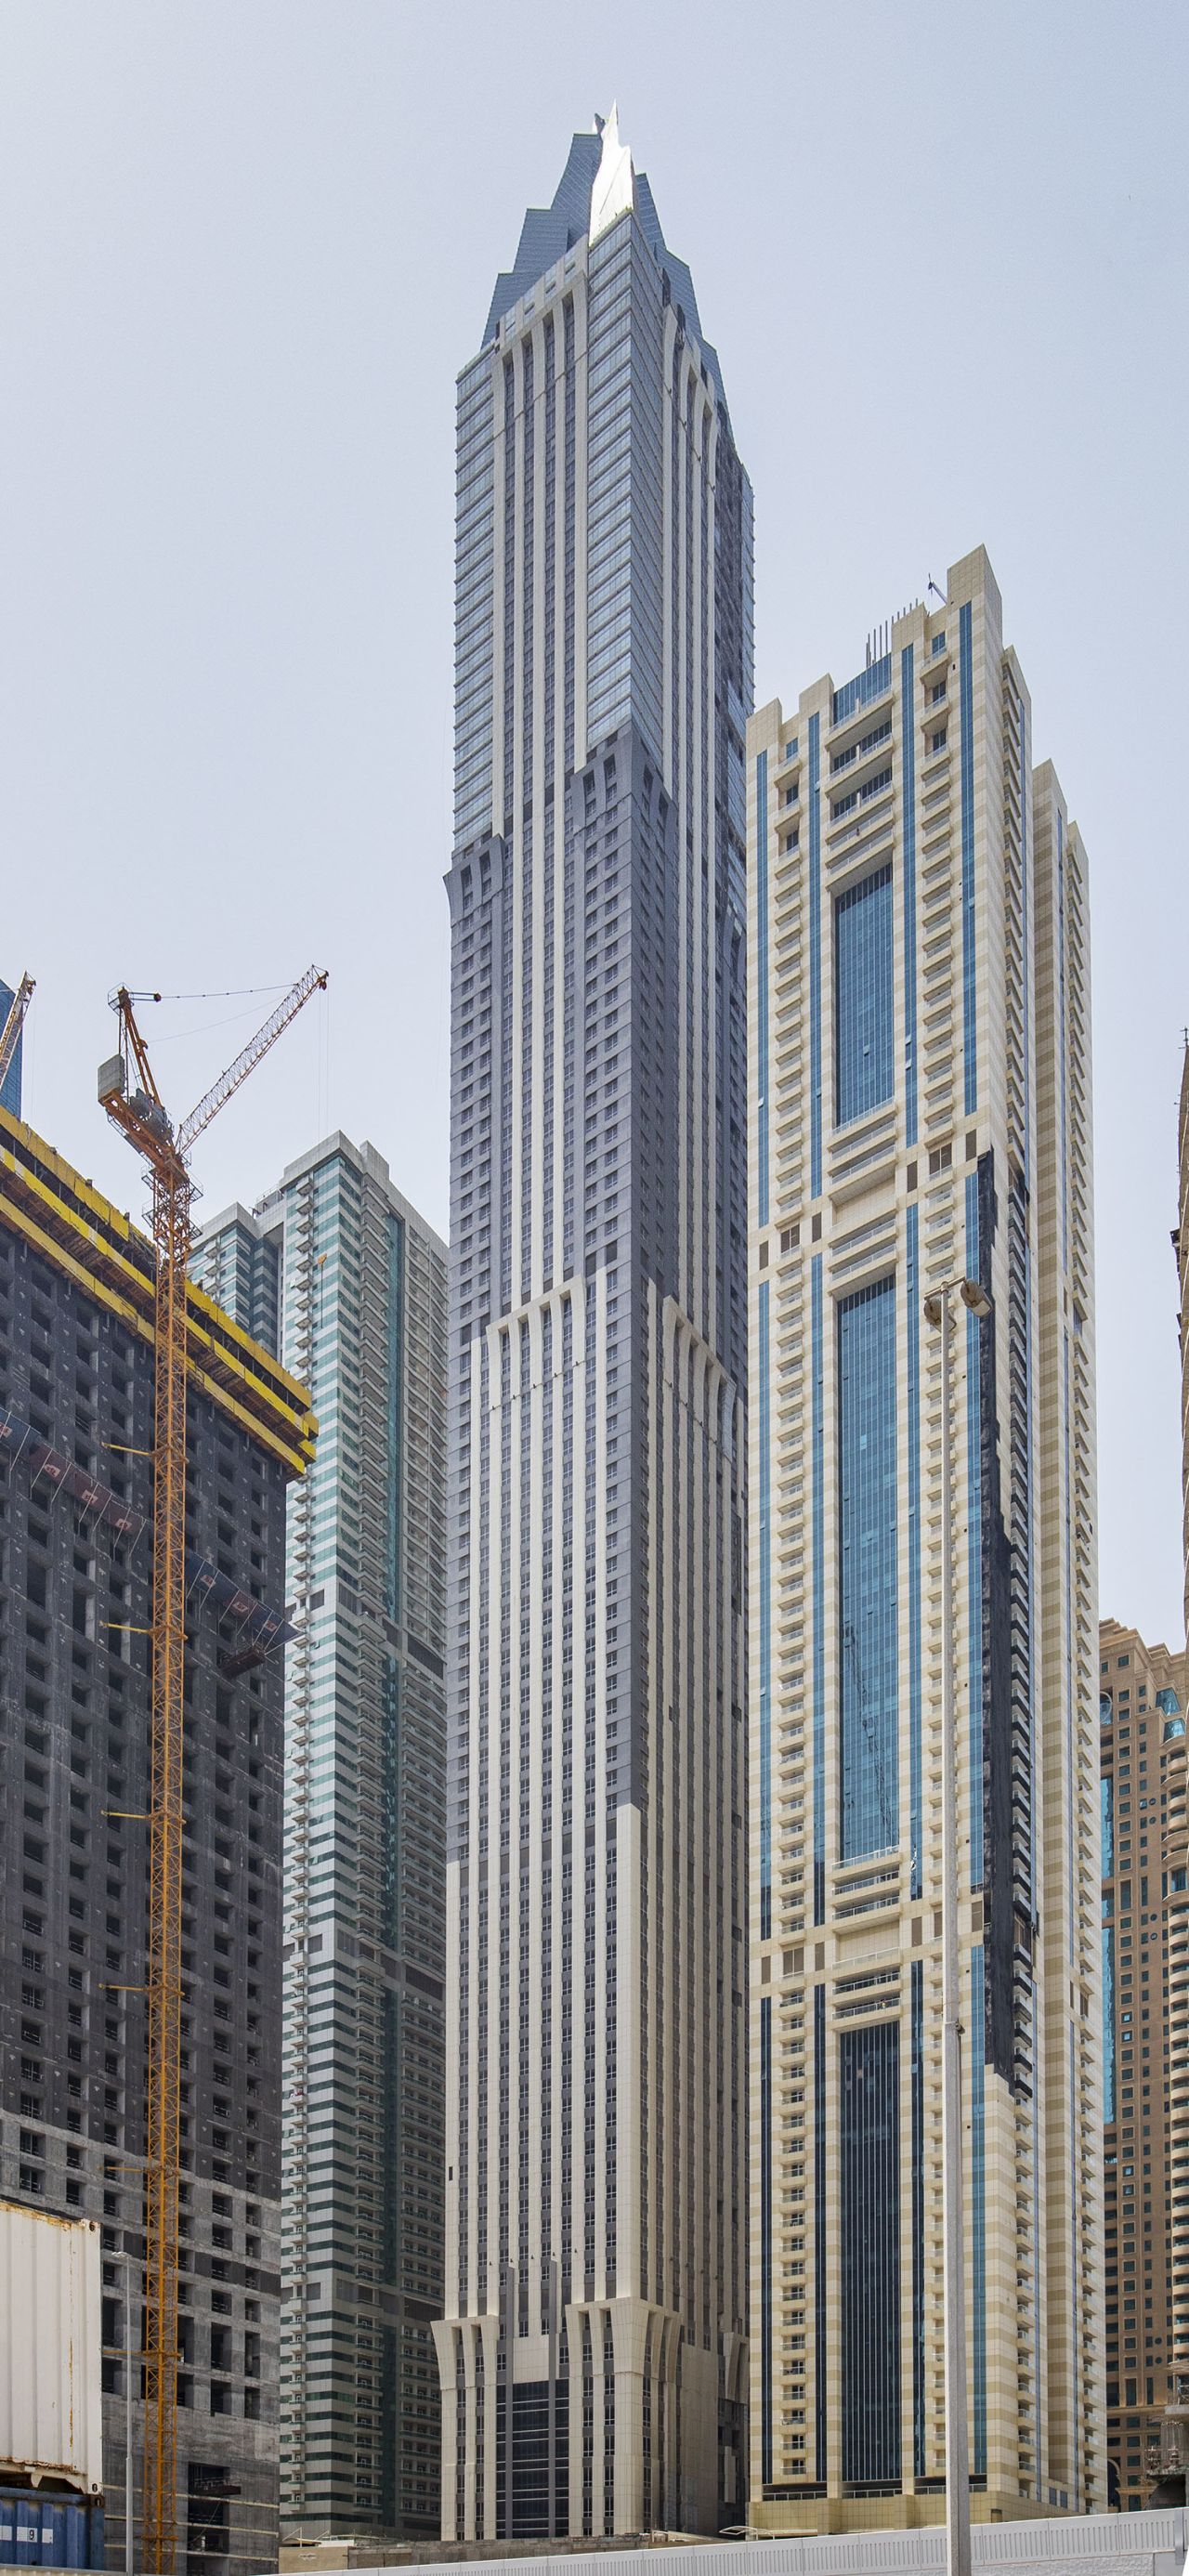 Dubai's 1,394-foot Marina 101 growing number of skyscrapers being primarily developed for residential purposes.